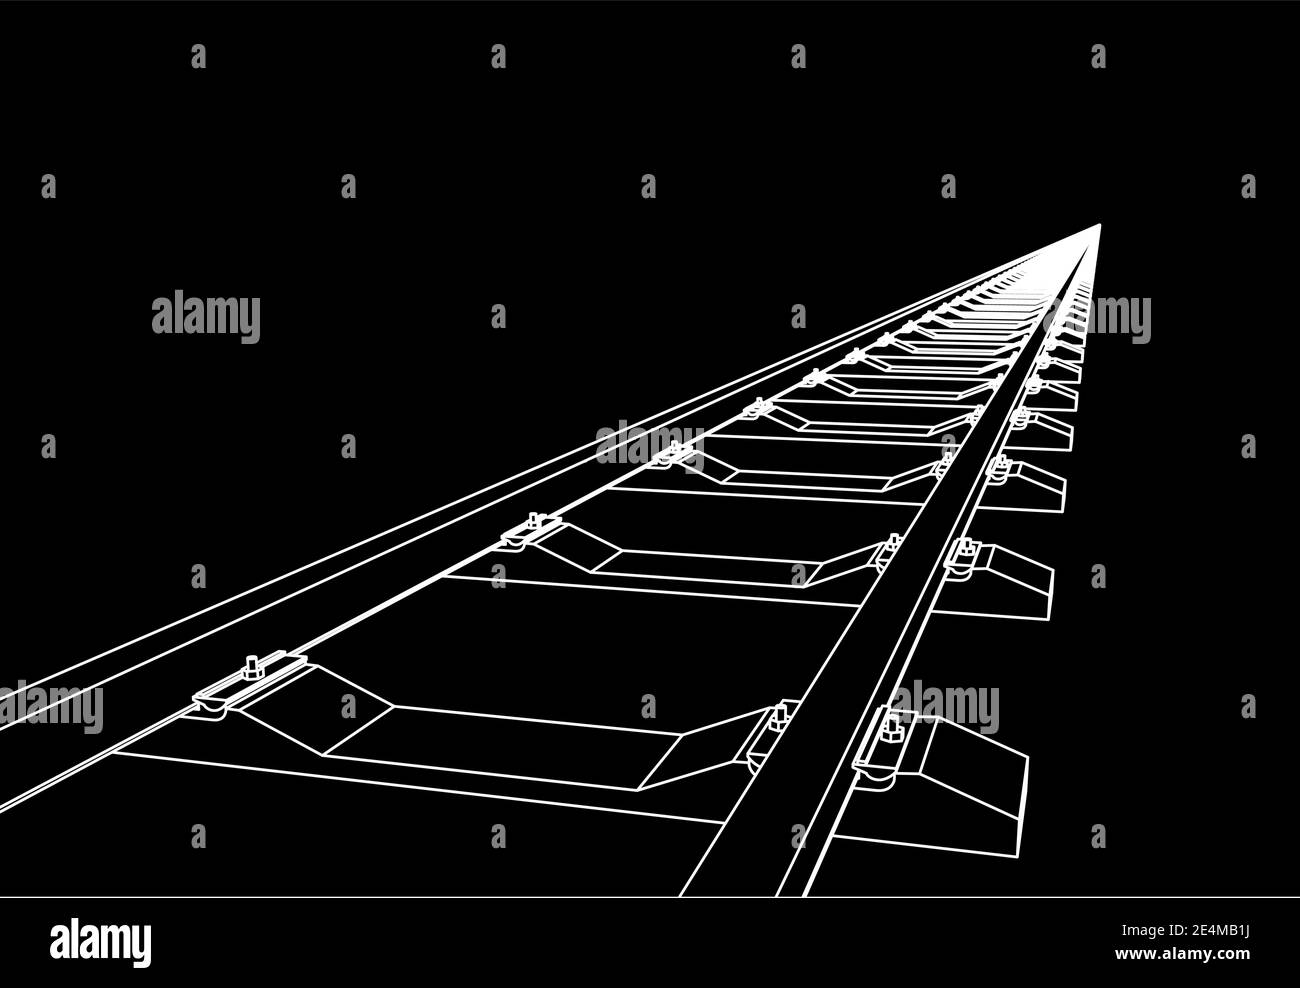 The railway going forward. 3d vector illustration on a black background. Stock Vector